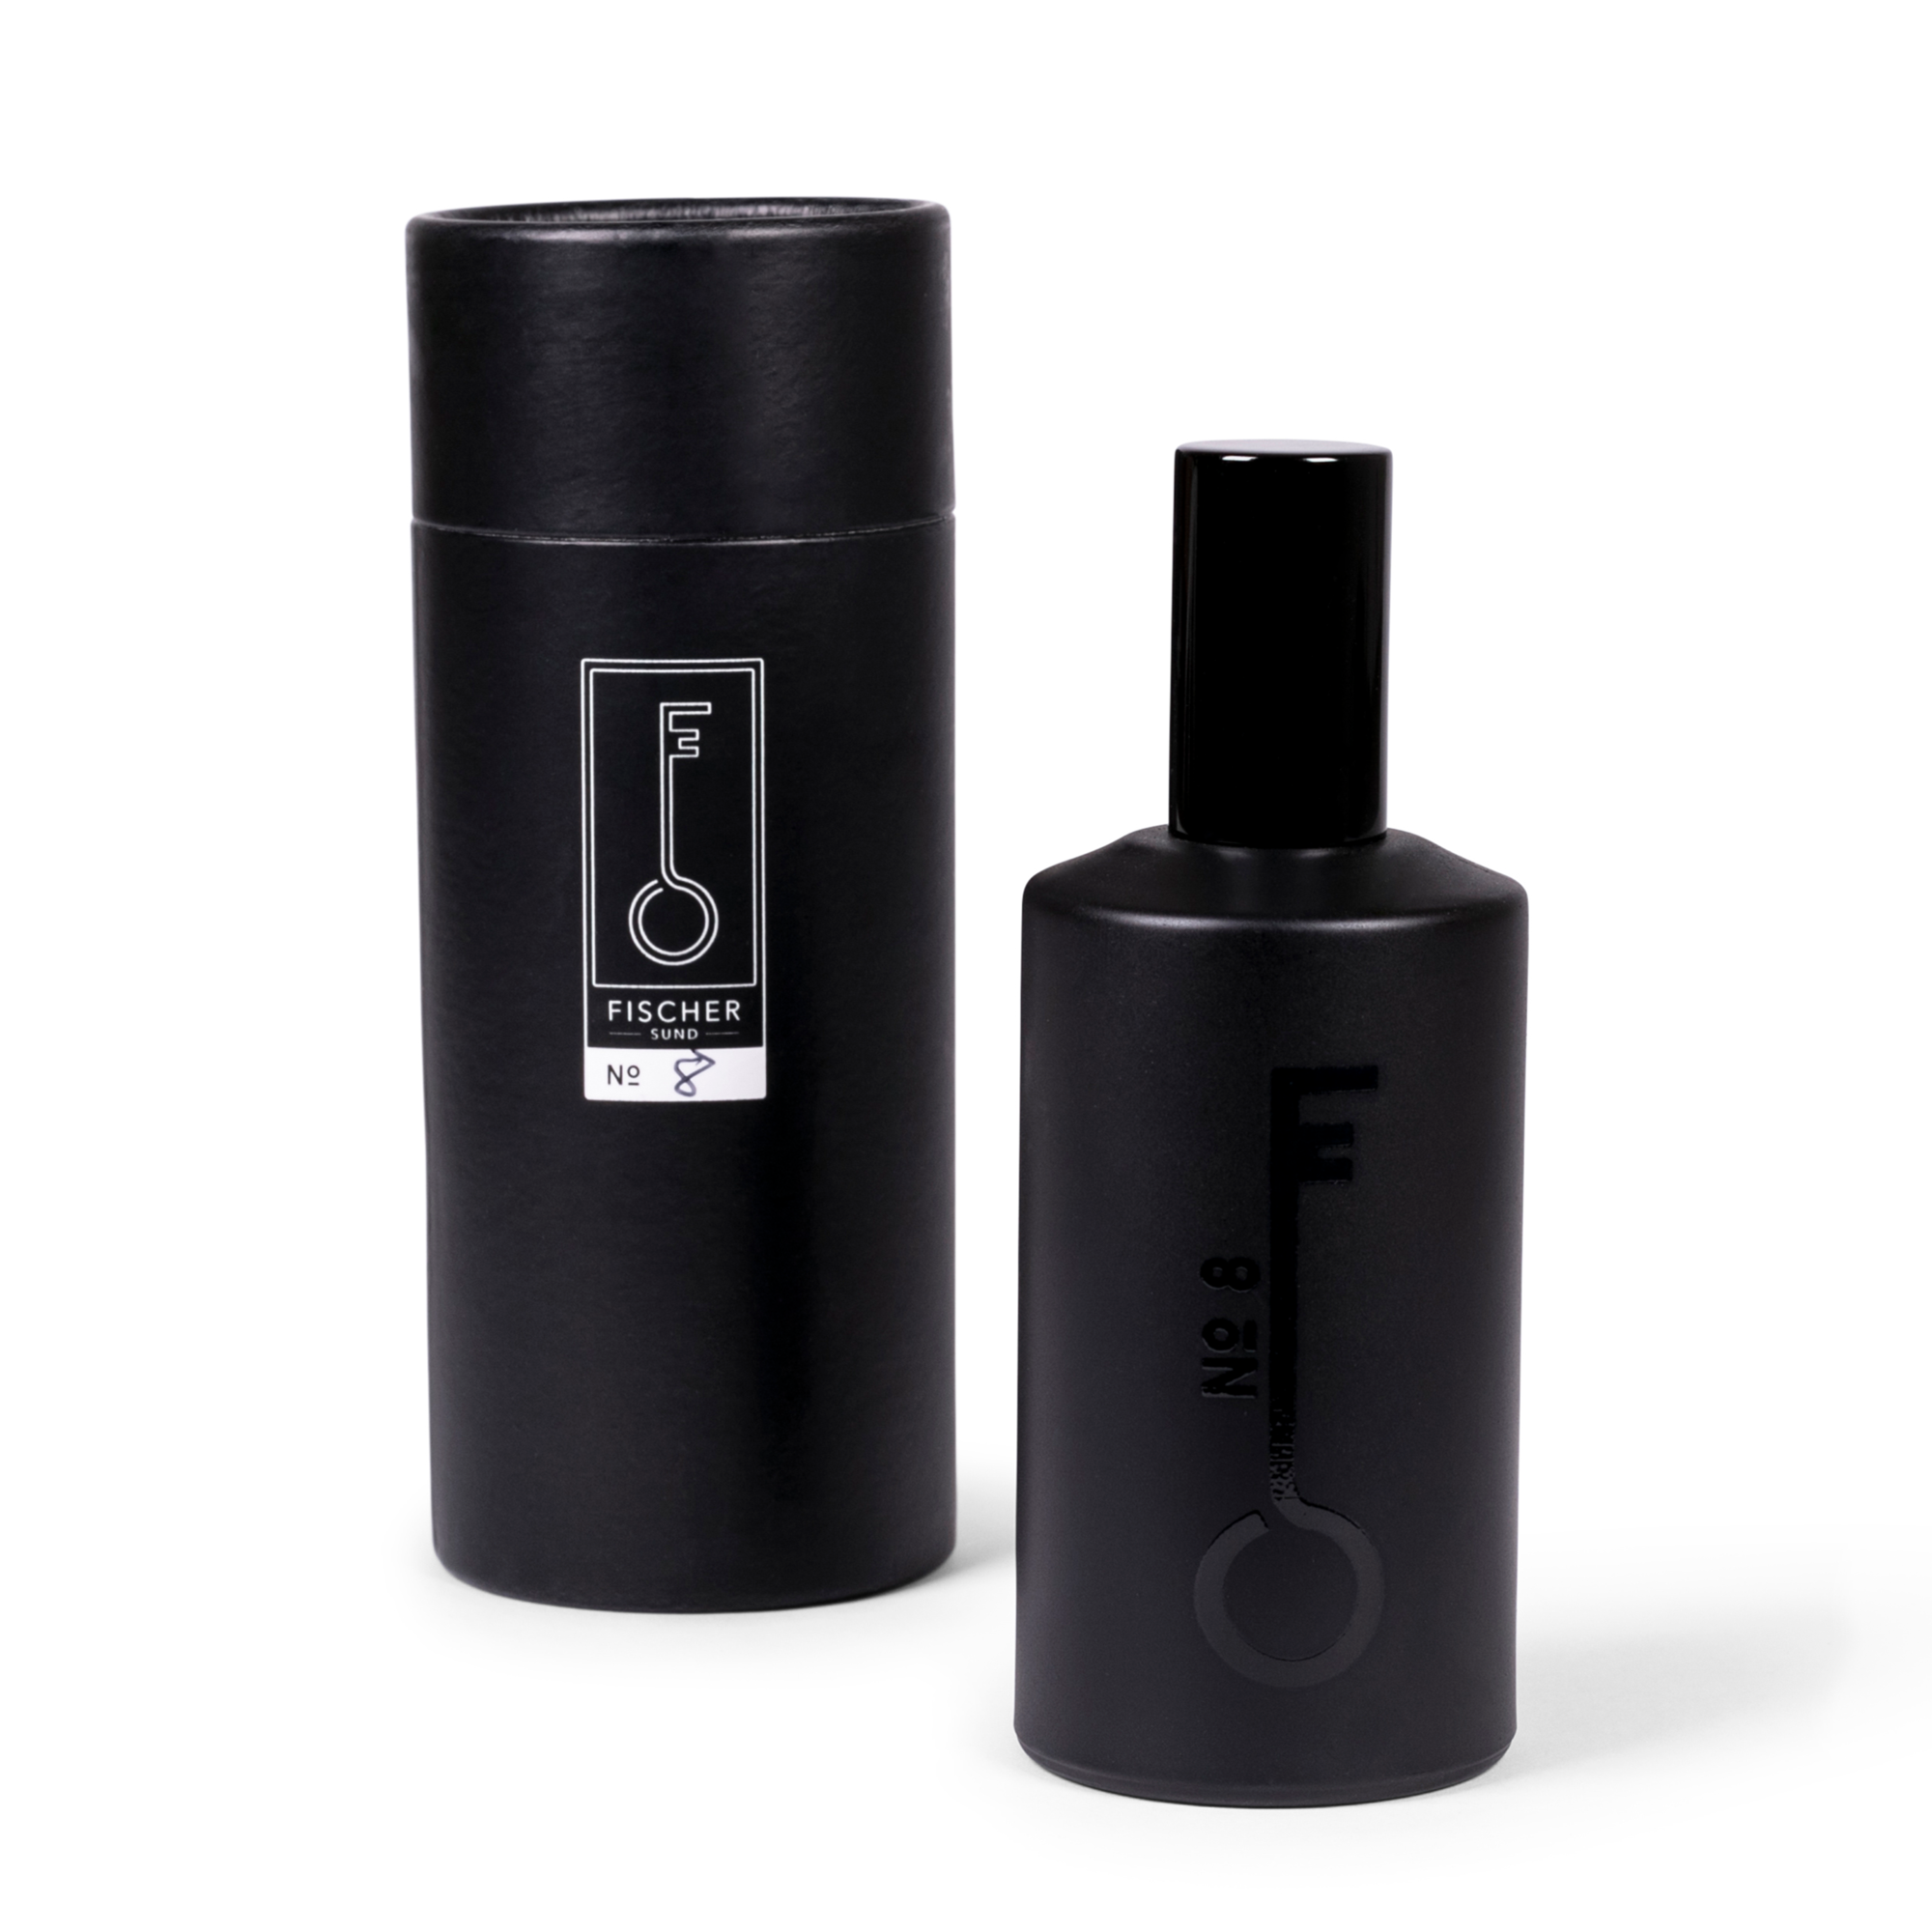 Fragrance No. 8: Crafted from a refreshing blend of pine, citrus, and rhubarb. Packed in a sleek black bottle and box.